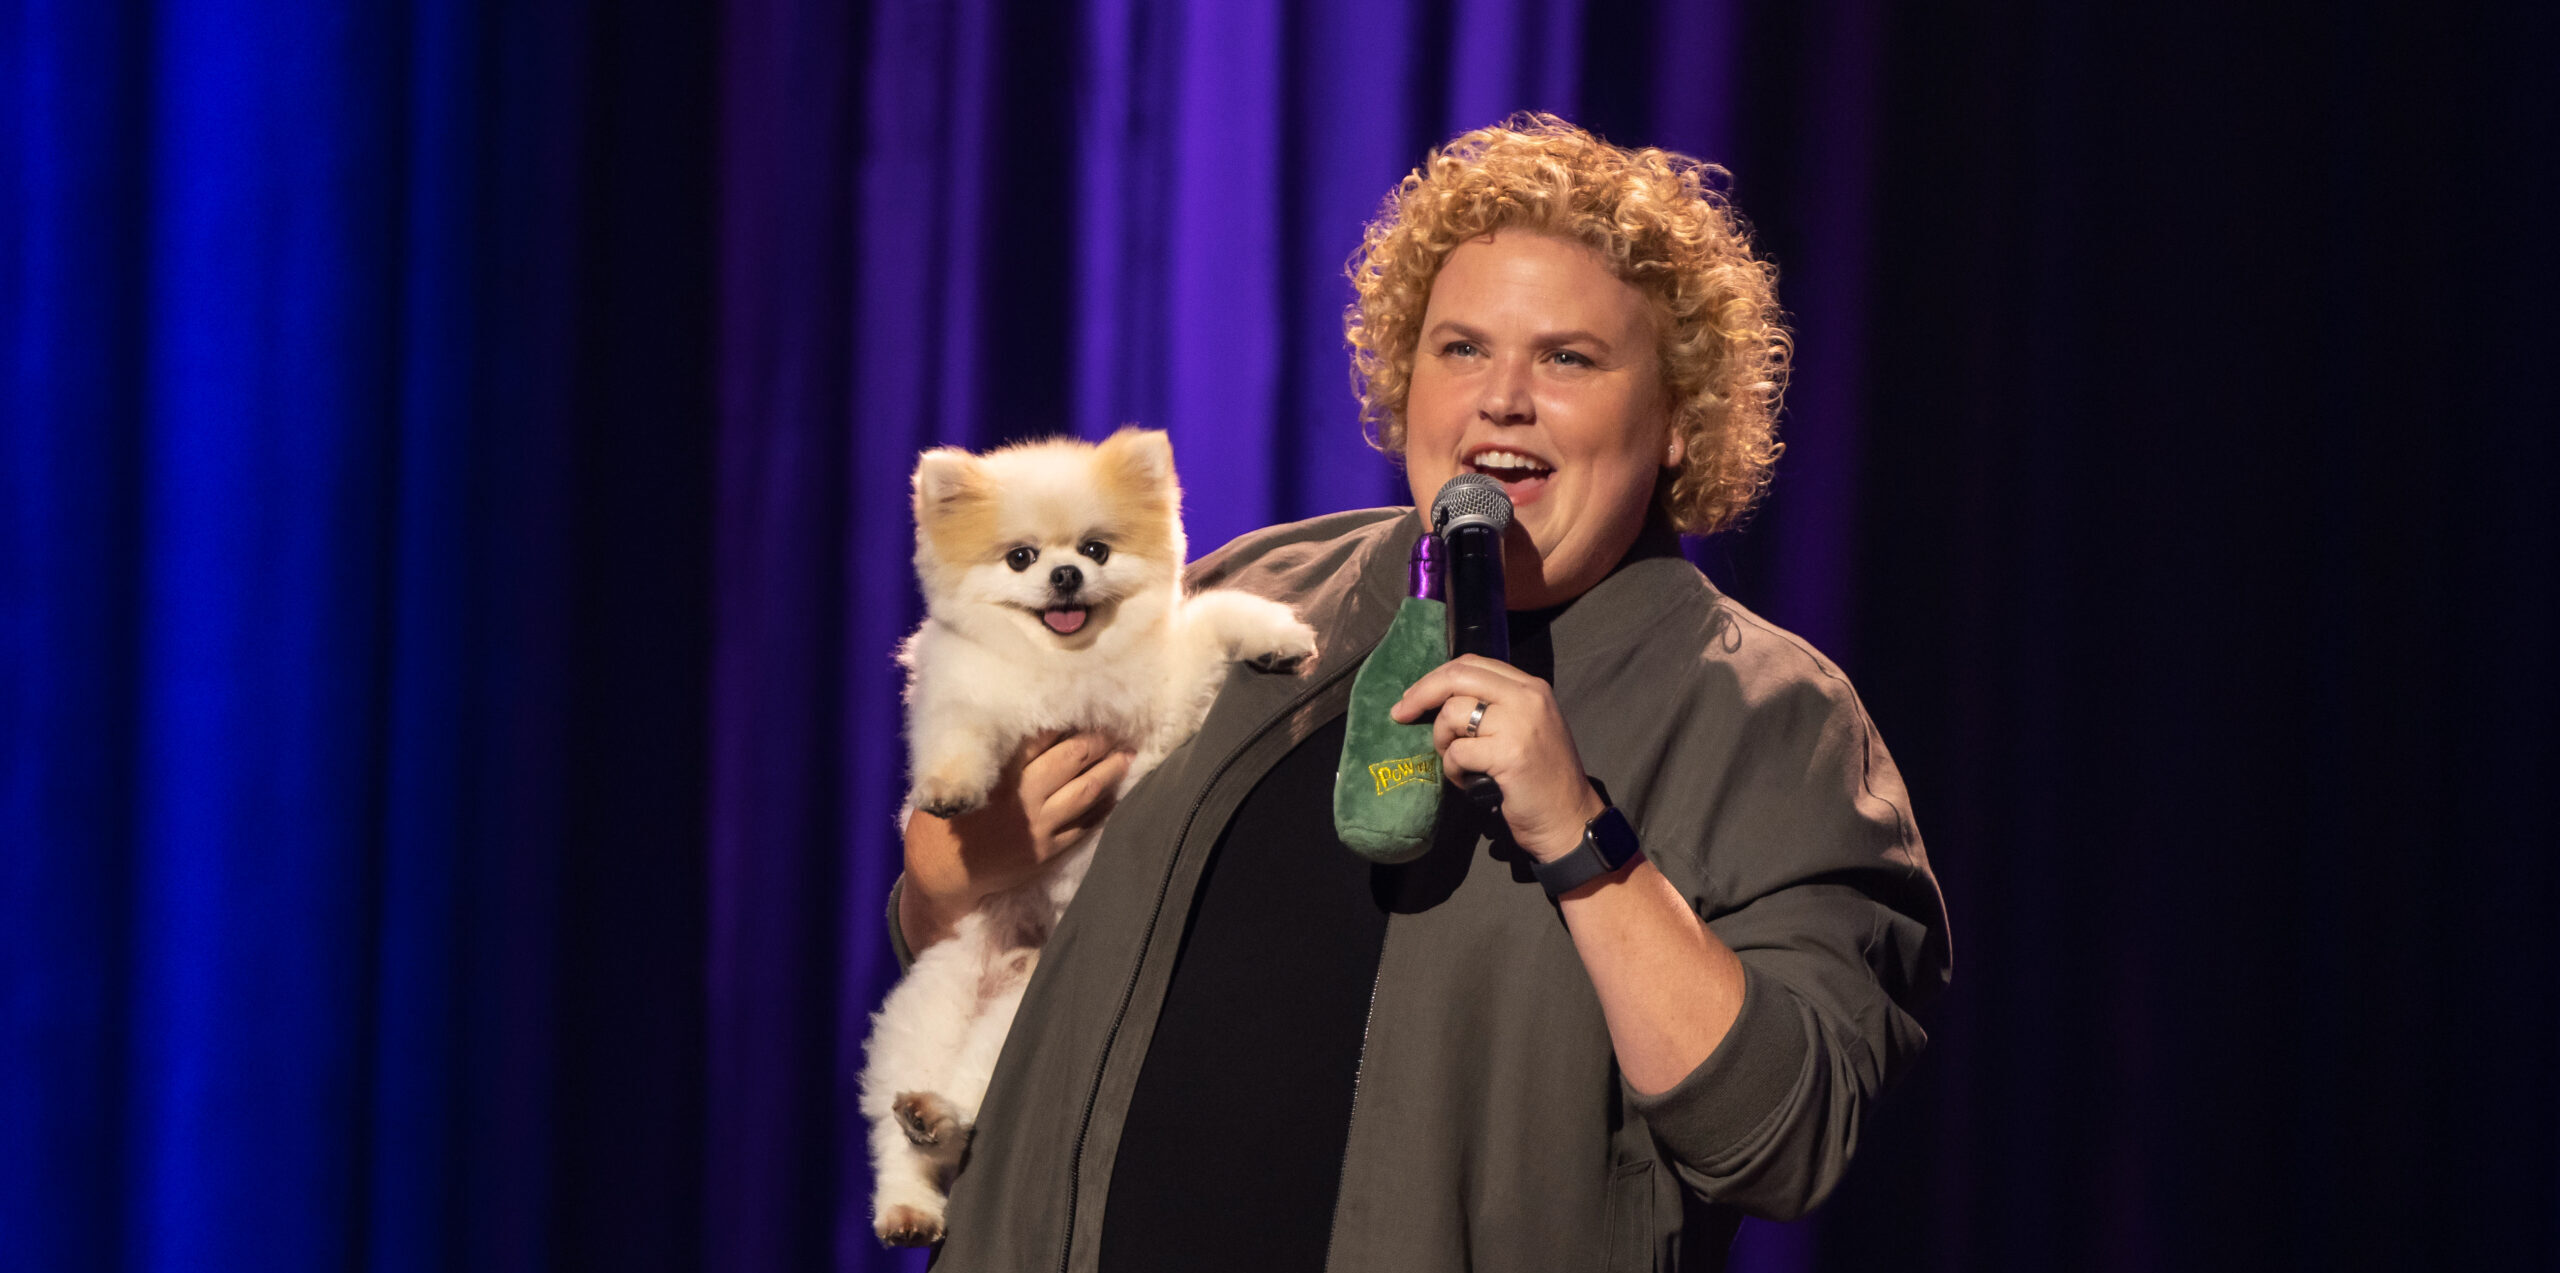 Trailer Watch: Fortune Feimster Cracks Jokes About Her Proposal in “Good Fortune”